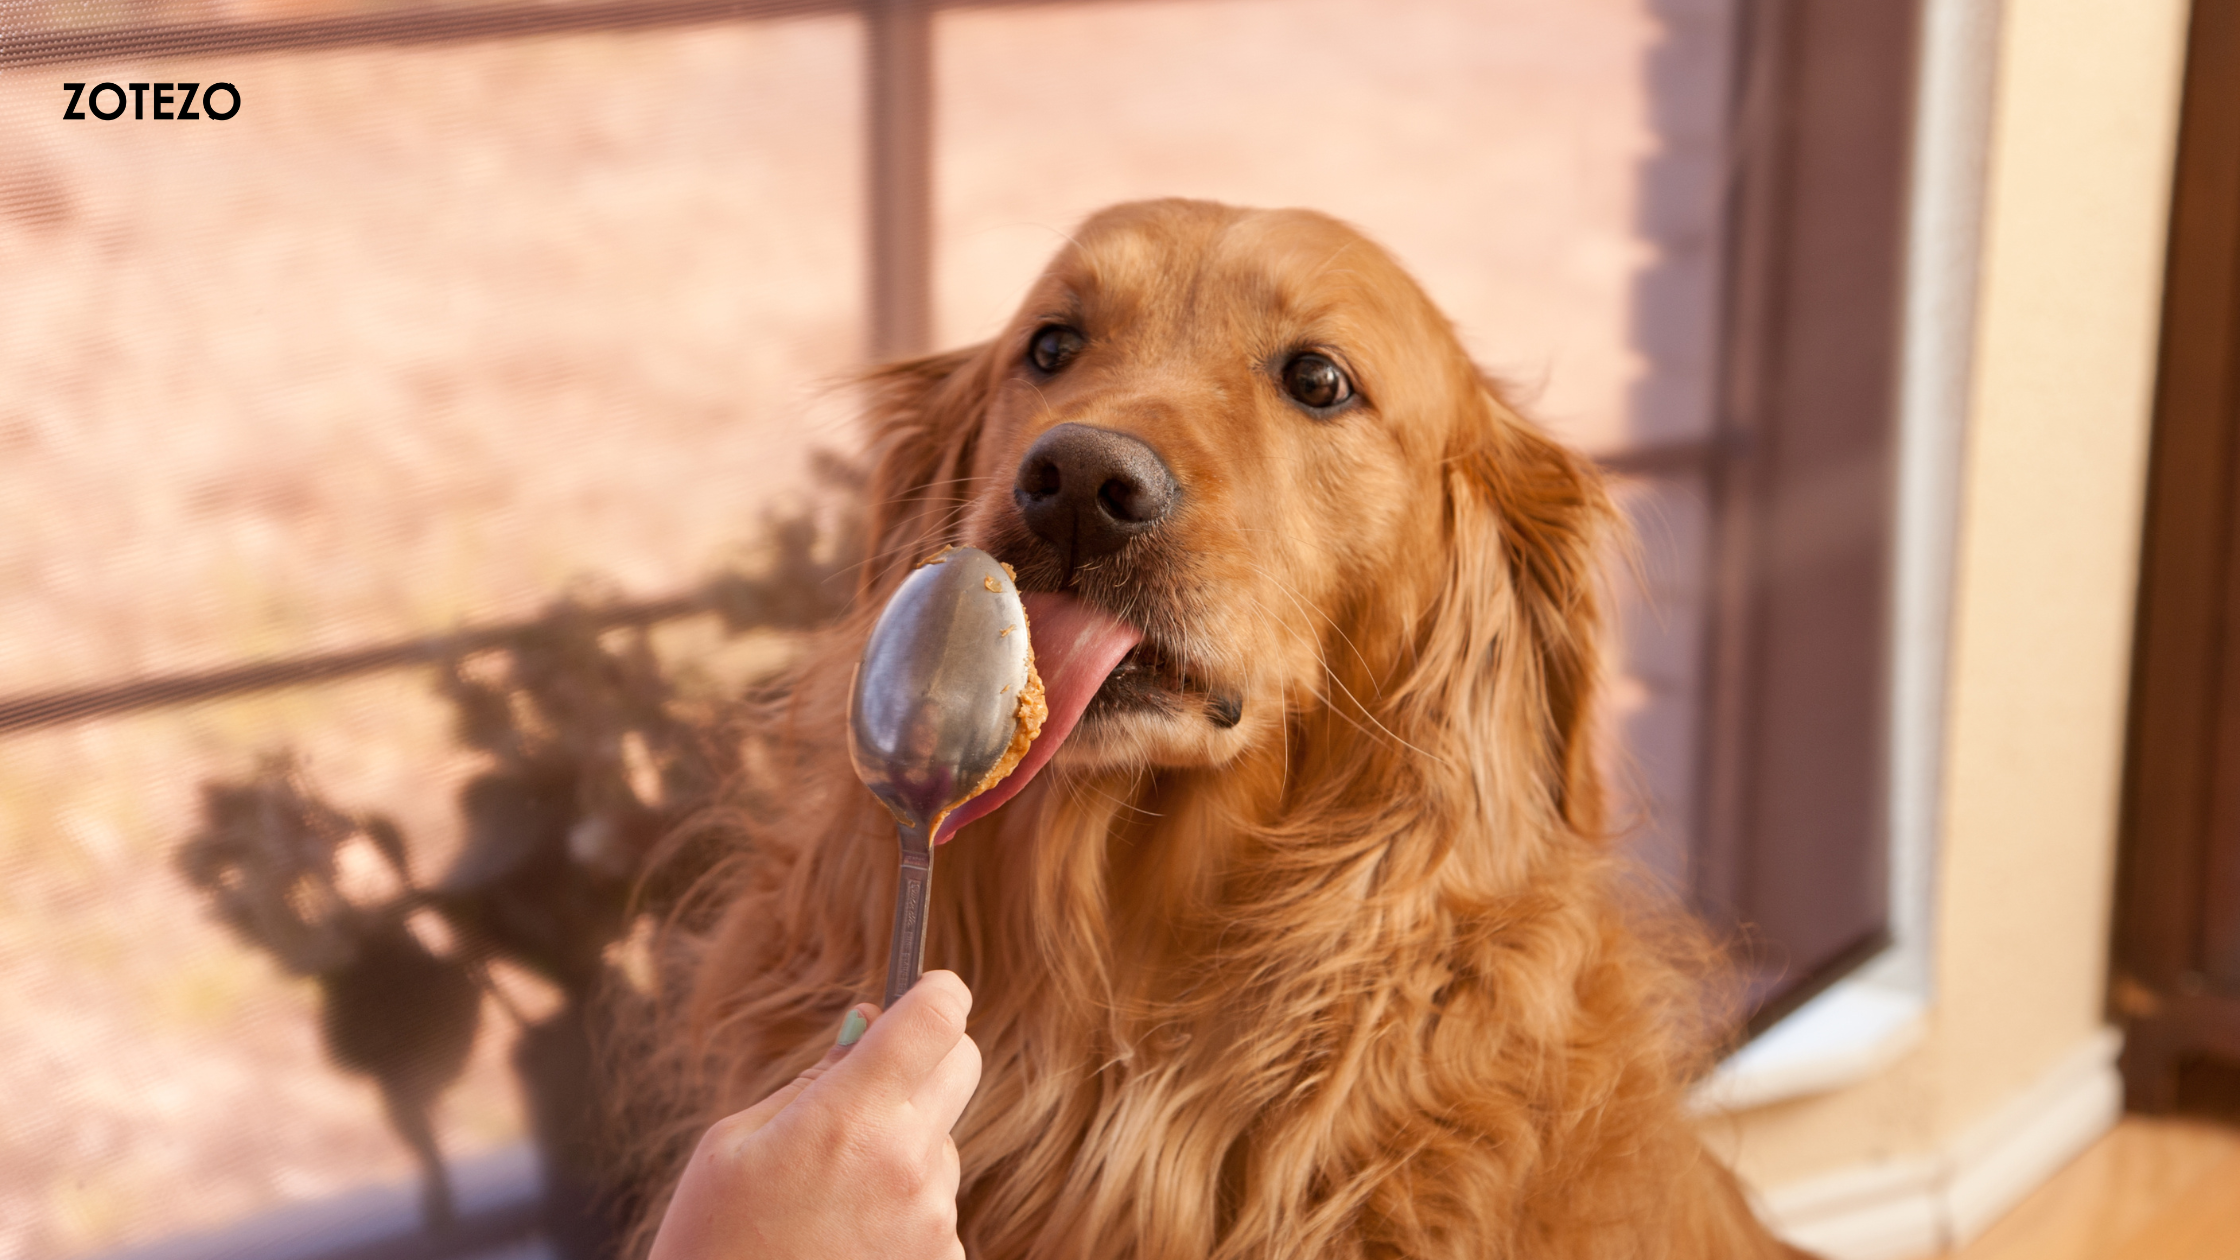 Peanut Butter For Dogs in Spain